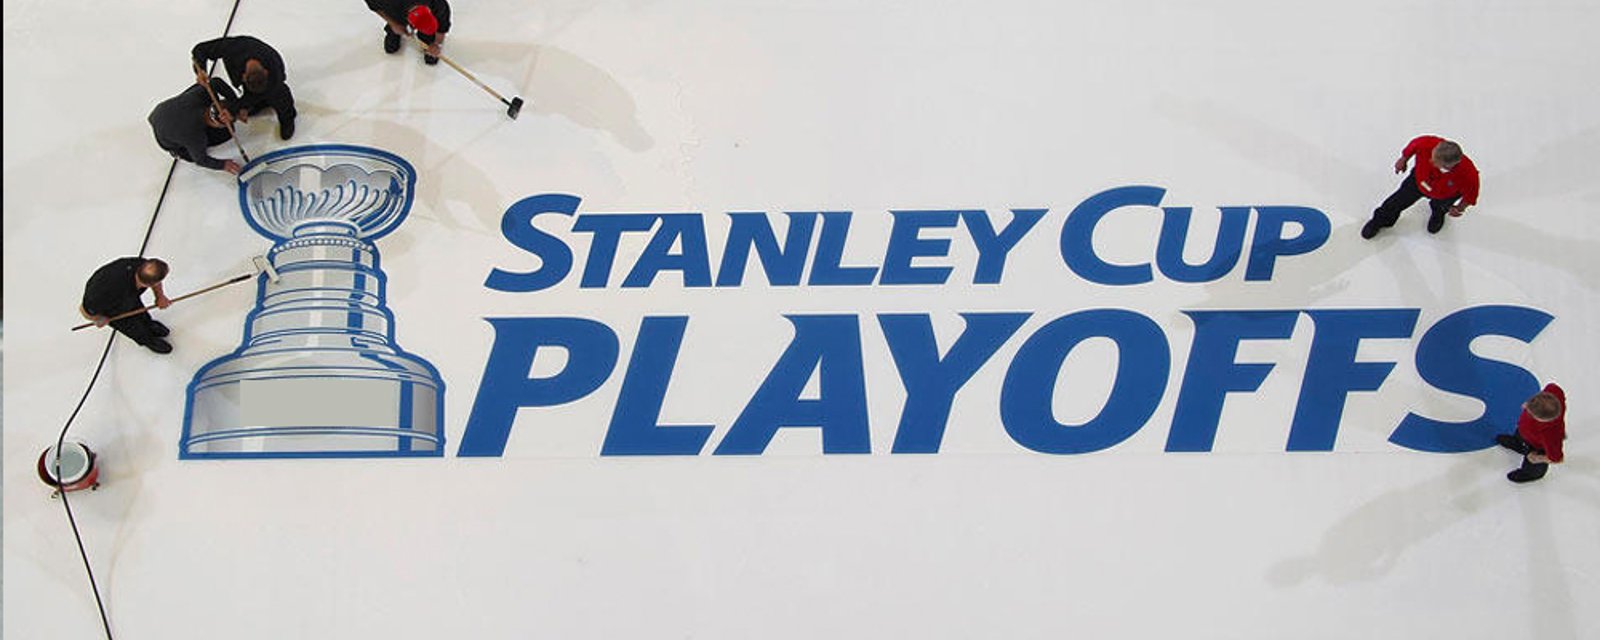 Report: NHL to head directly into Stanley Cup Playoffs when play resumes